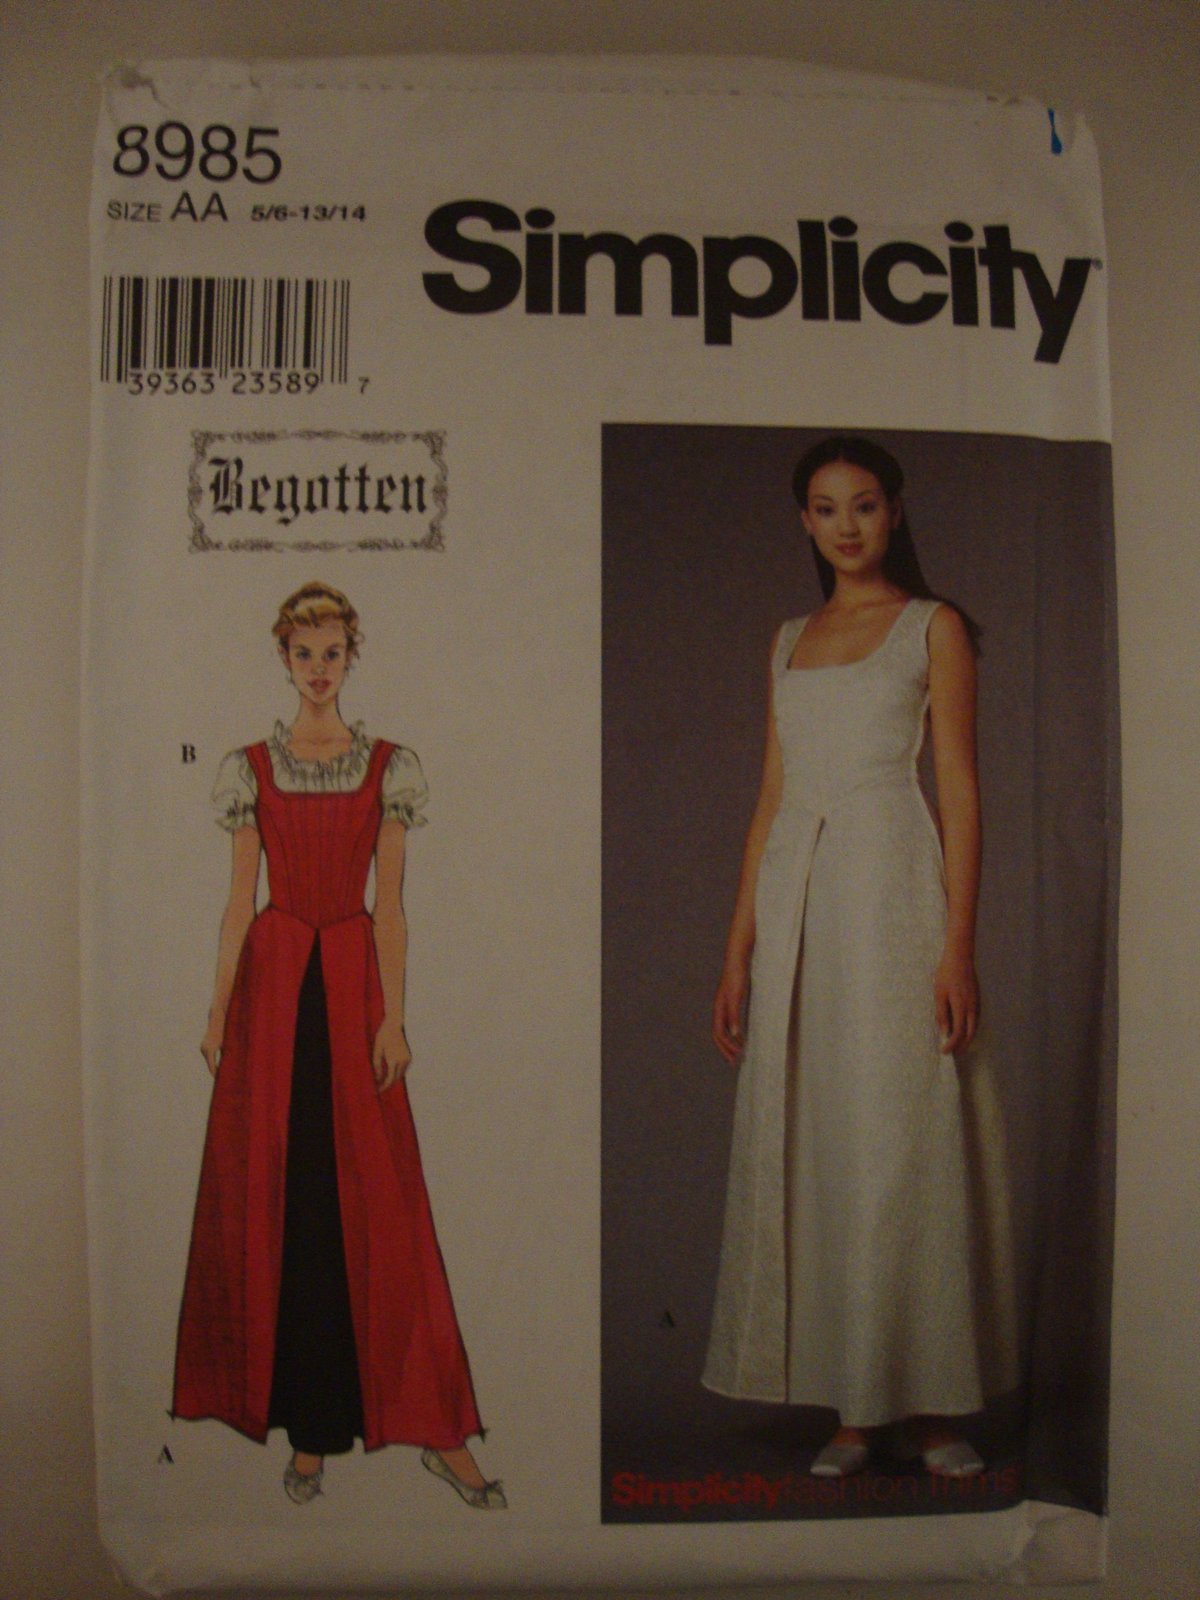 Simplicity - Begotten- Size AA 5/6 - 13/14 - #8985 - Dress and Blouse - $11.87